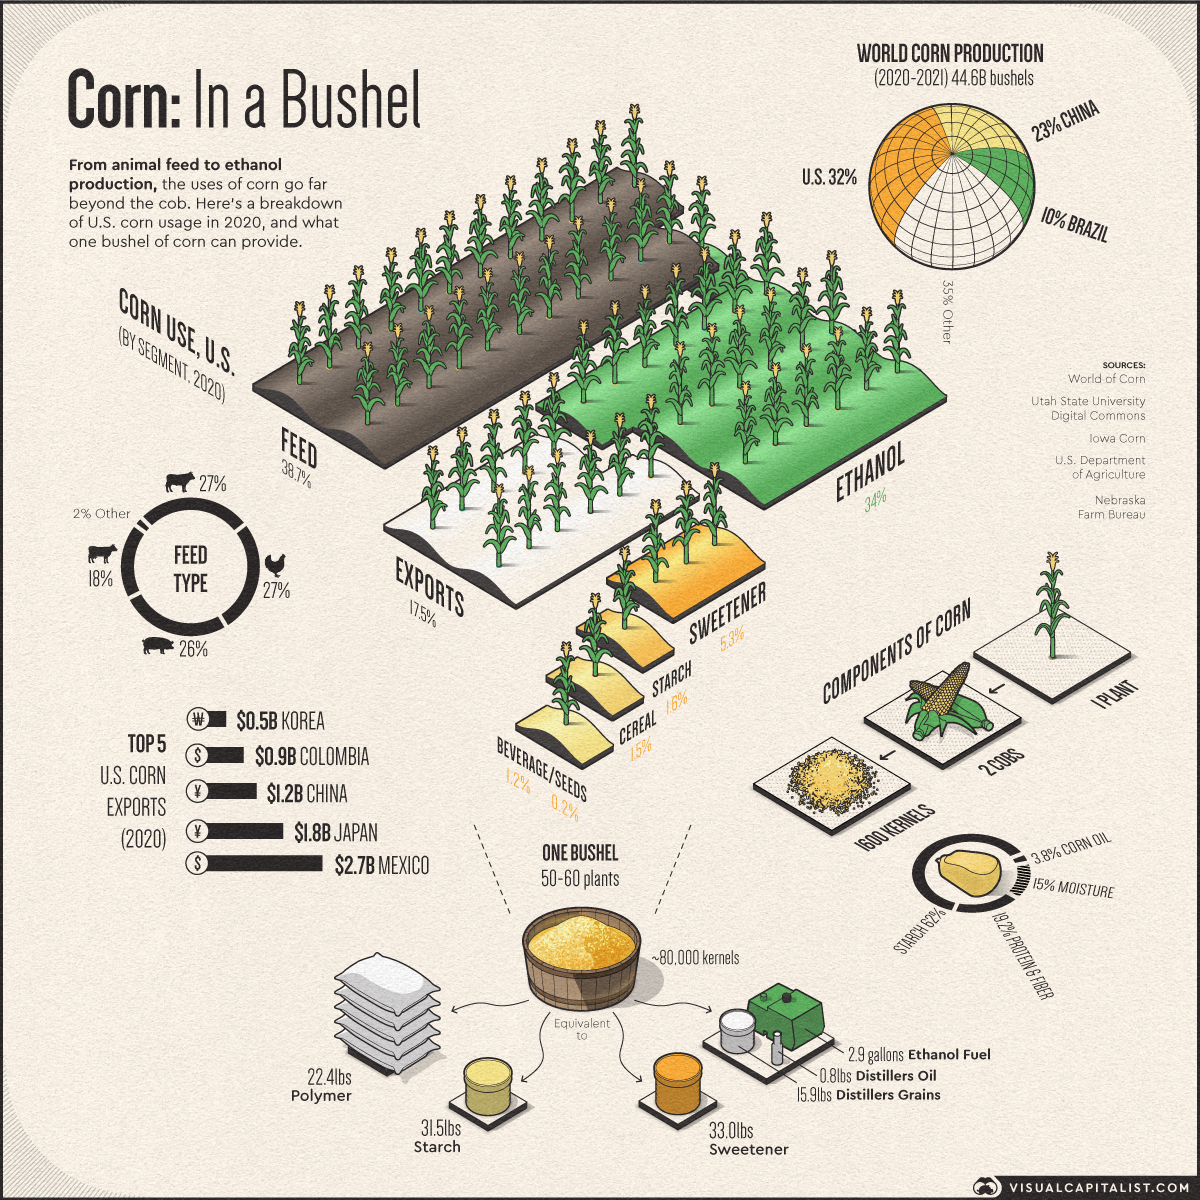 The uses of corn